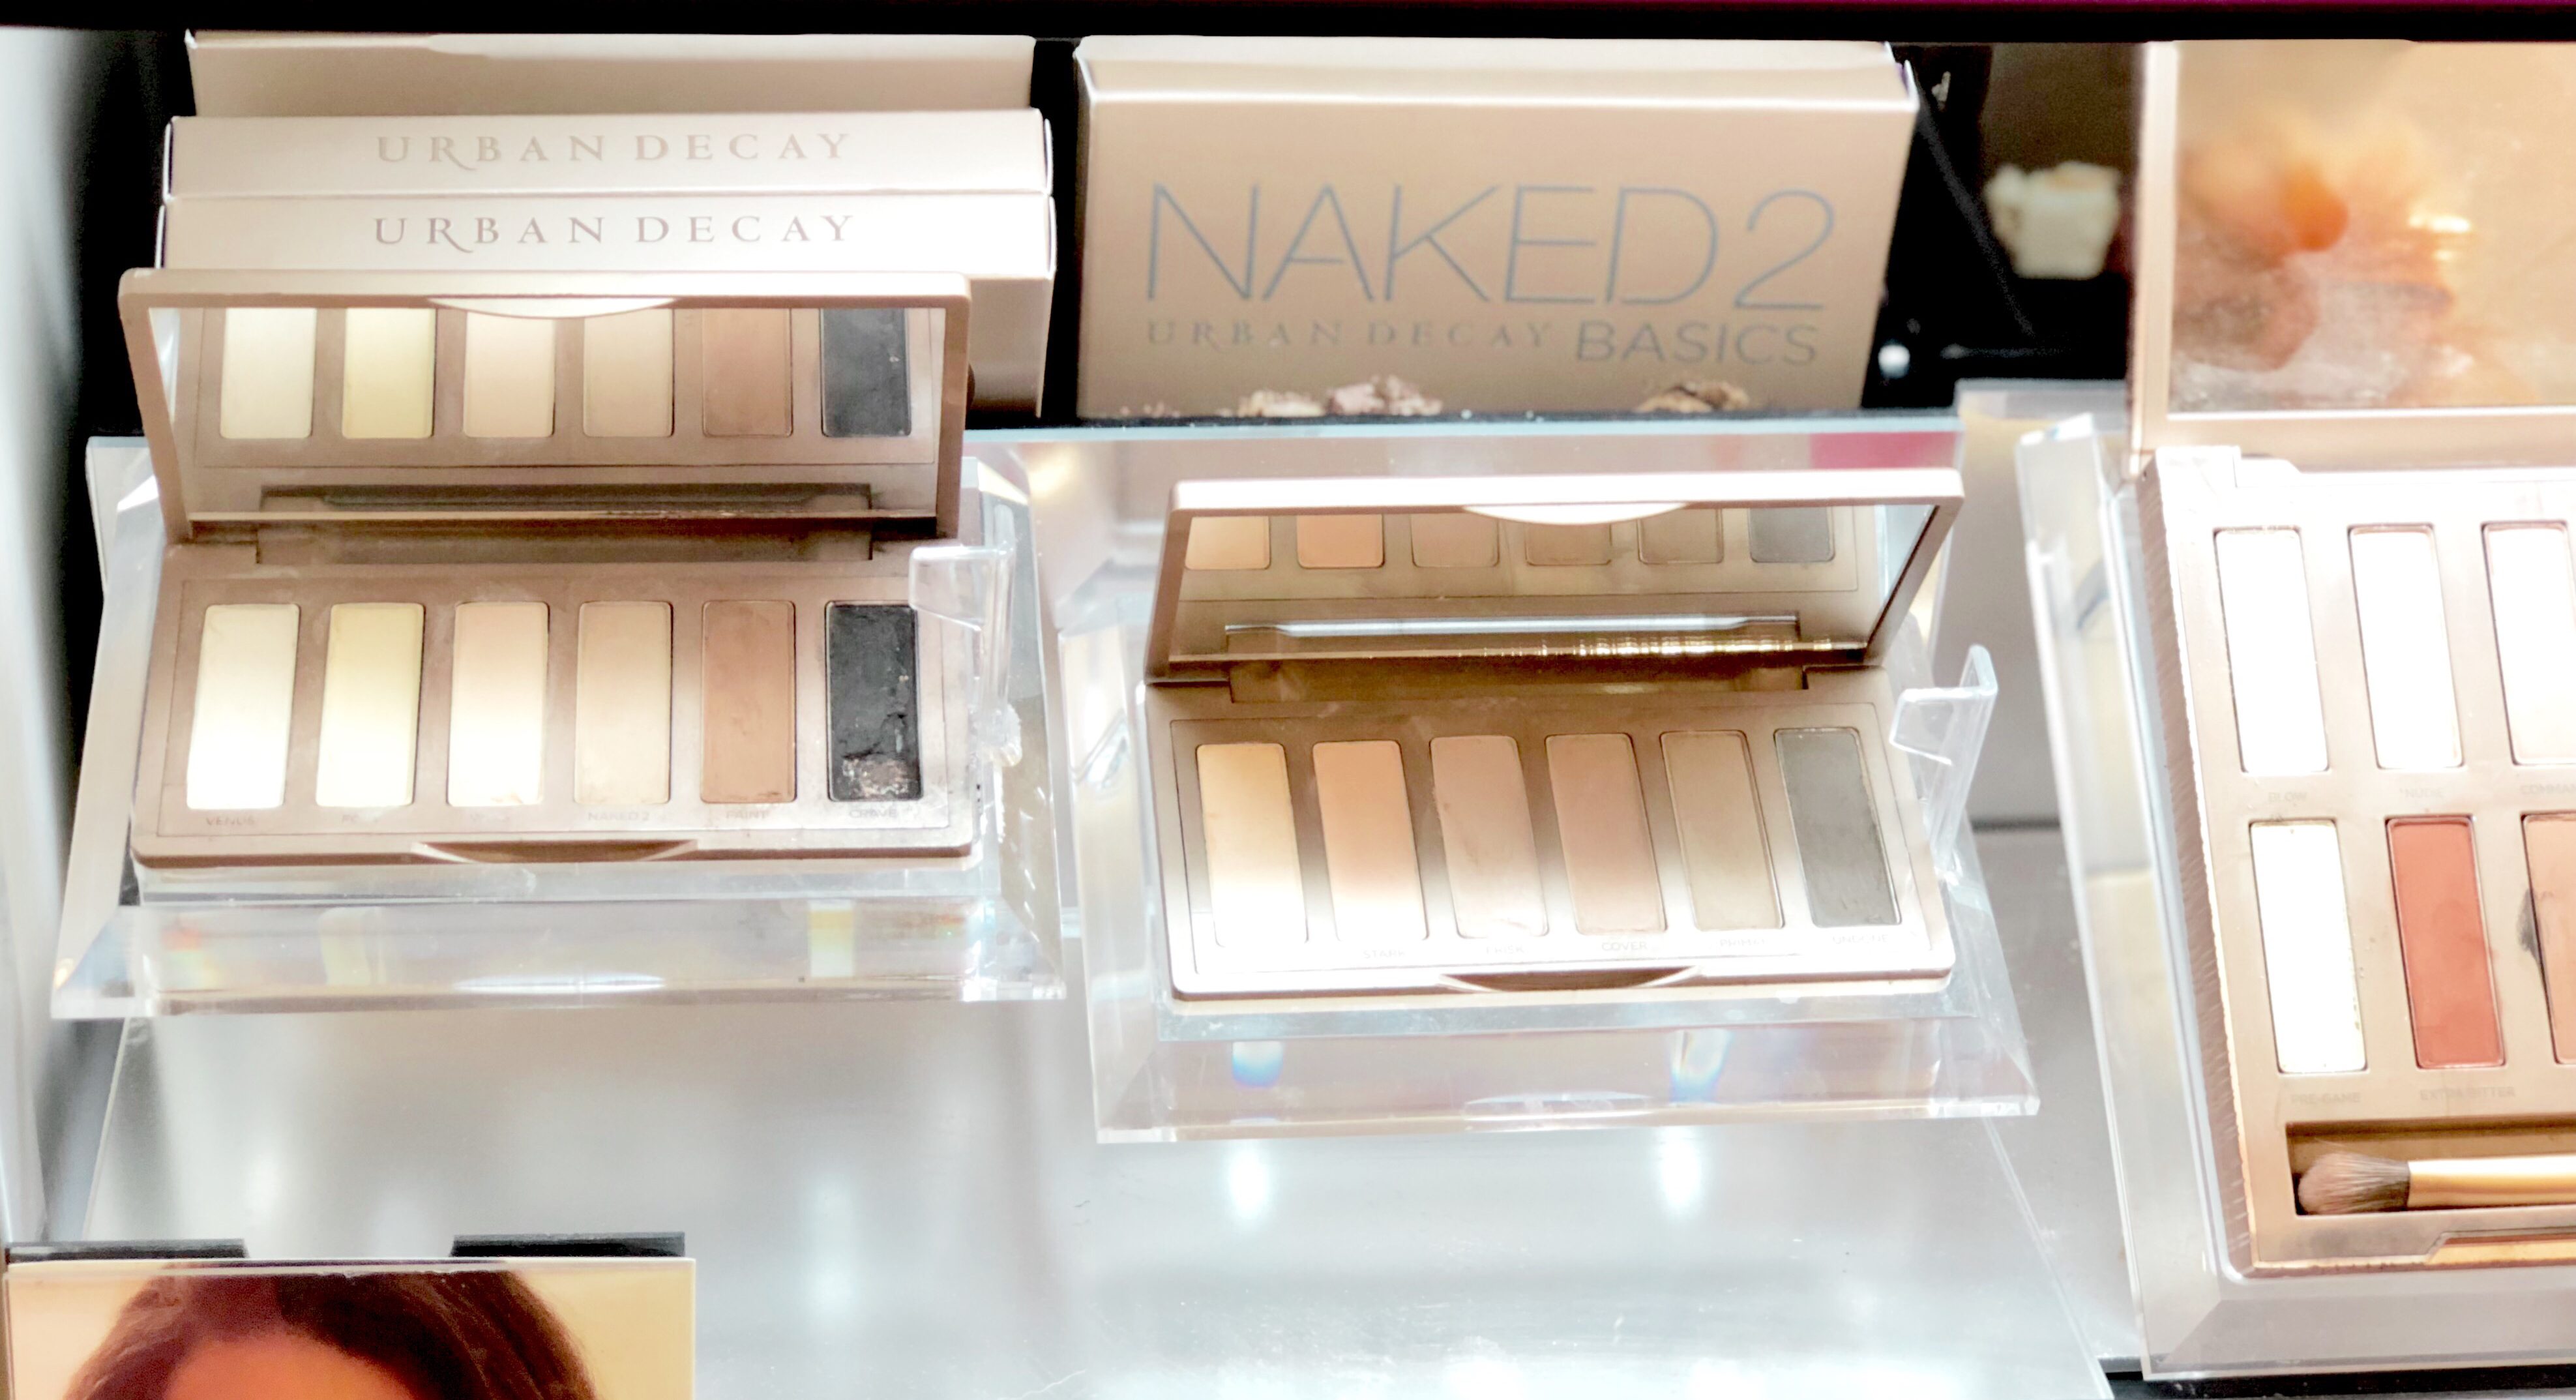 Urban Decay Naked palettes